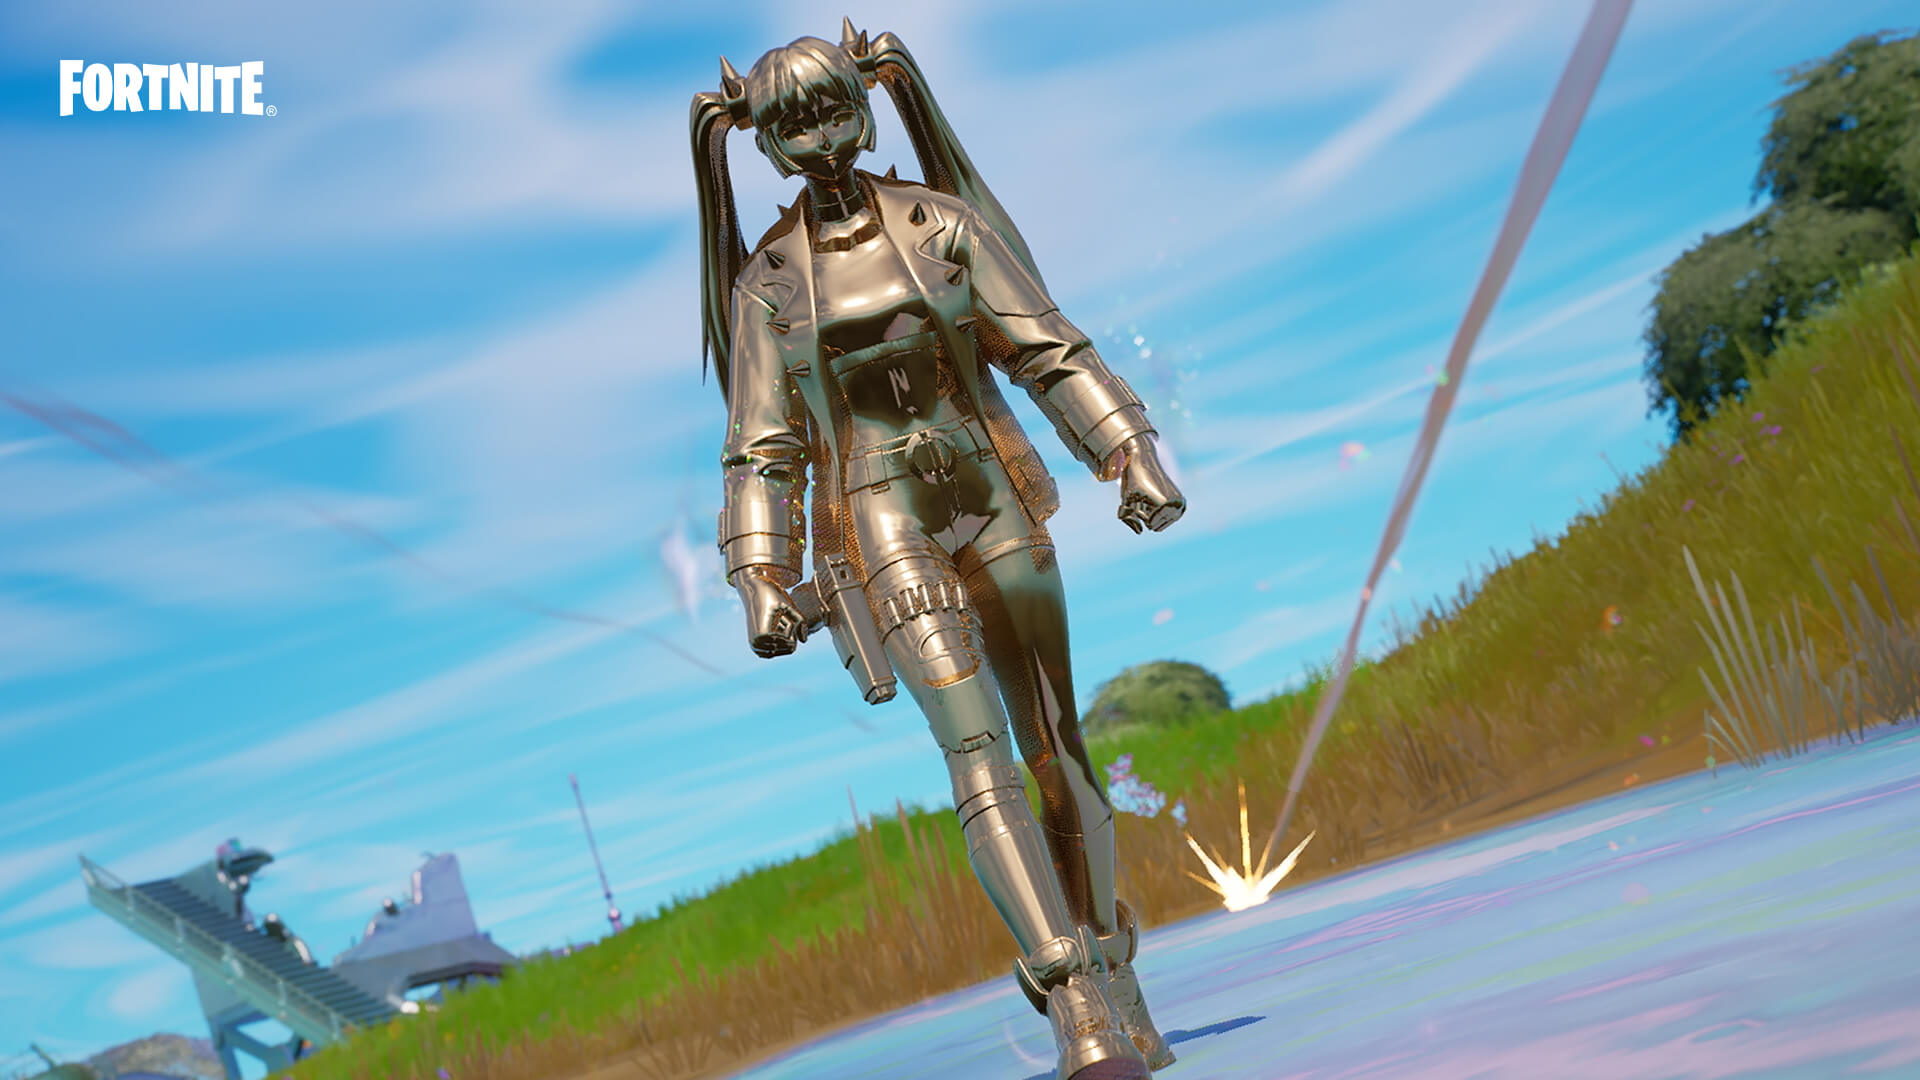 A promo image from Fortnite showing a character in chrome form, which turns the enitre skin chrome colored